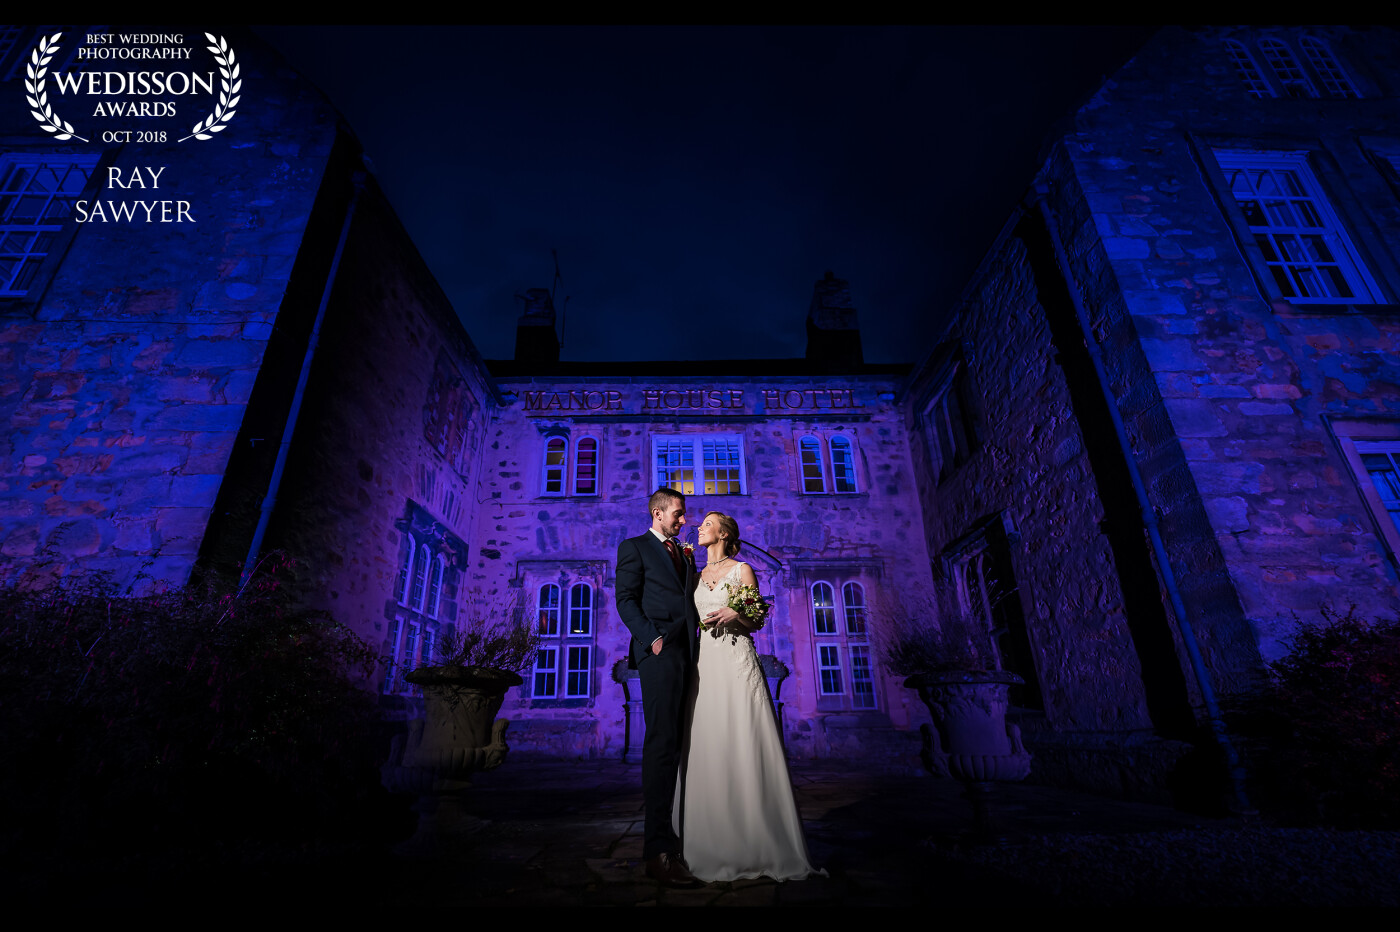 Love the colour on this photo. The couple chose the purple to reflect their wedding. Photo shot at 14mm for dramatic effect. Purple gel firing into building behind the couple and then moved to the left and right for the sides. The sides were then composited back in so the entire building was purple.